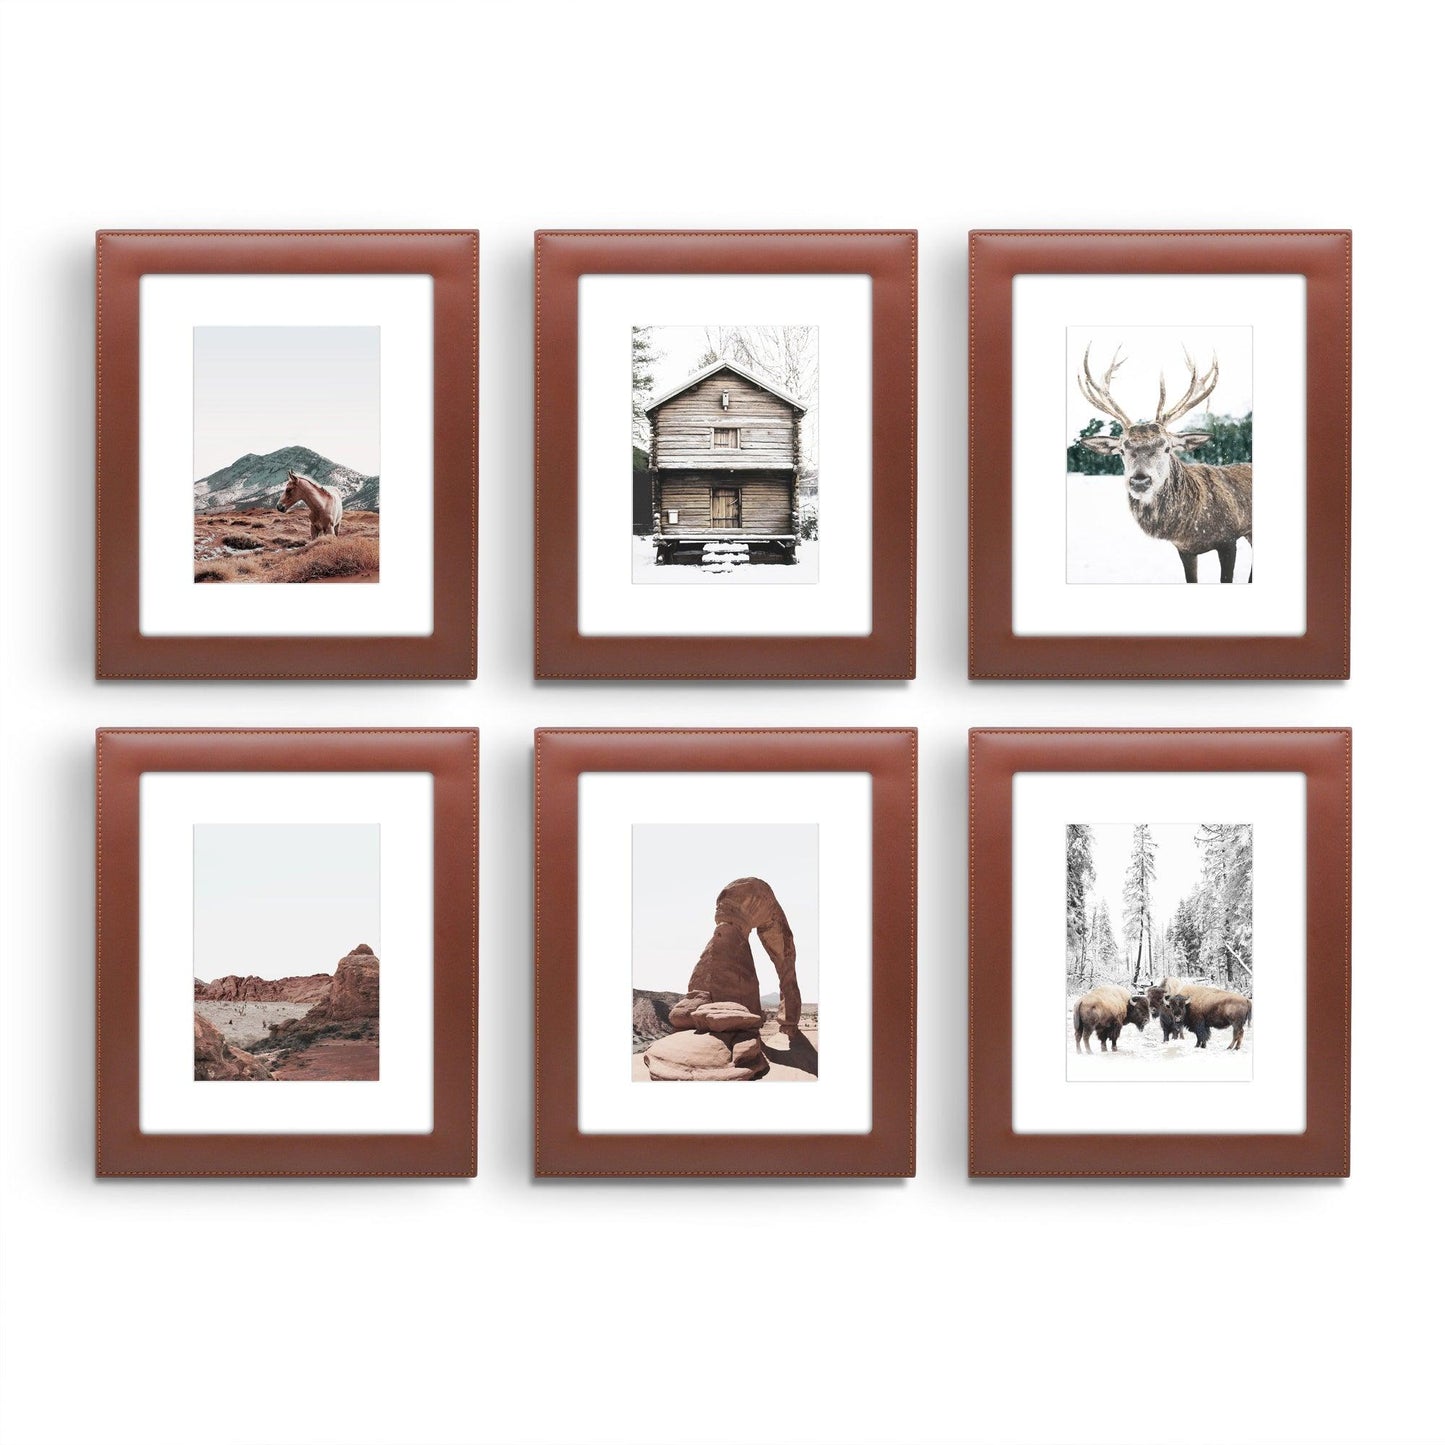 Snowy Mountain Arches National Park - 6 Piece Brown Framed Gallery Art Set